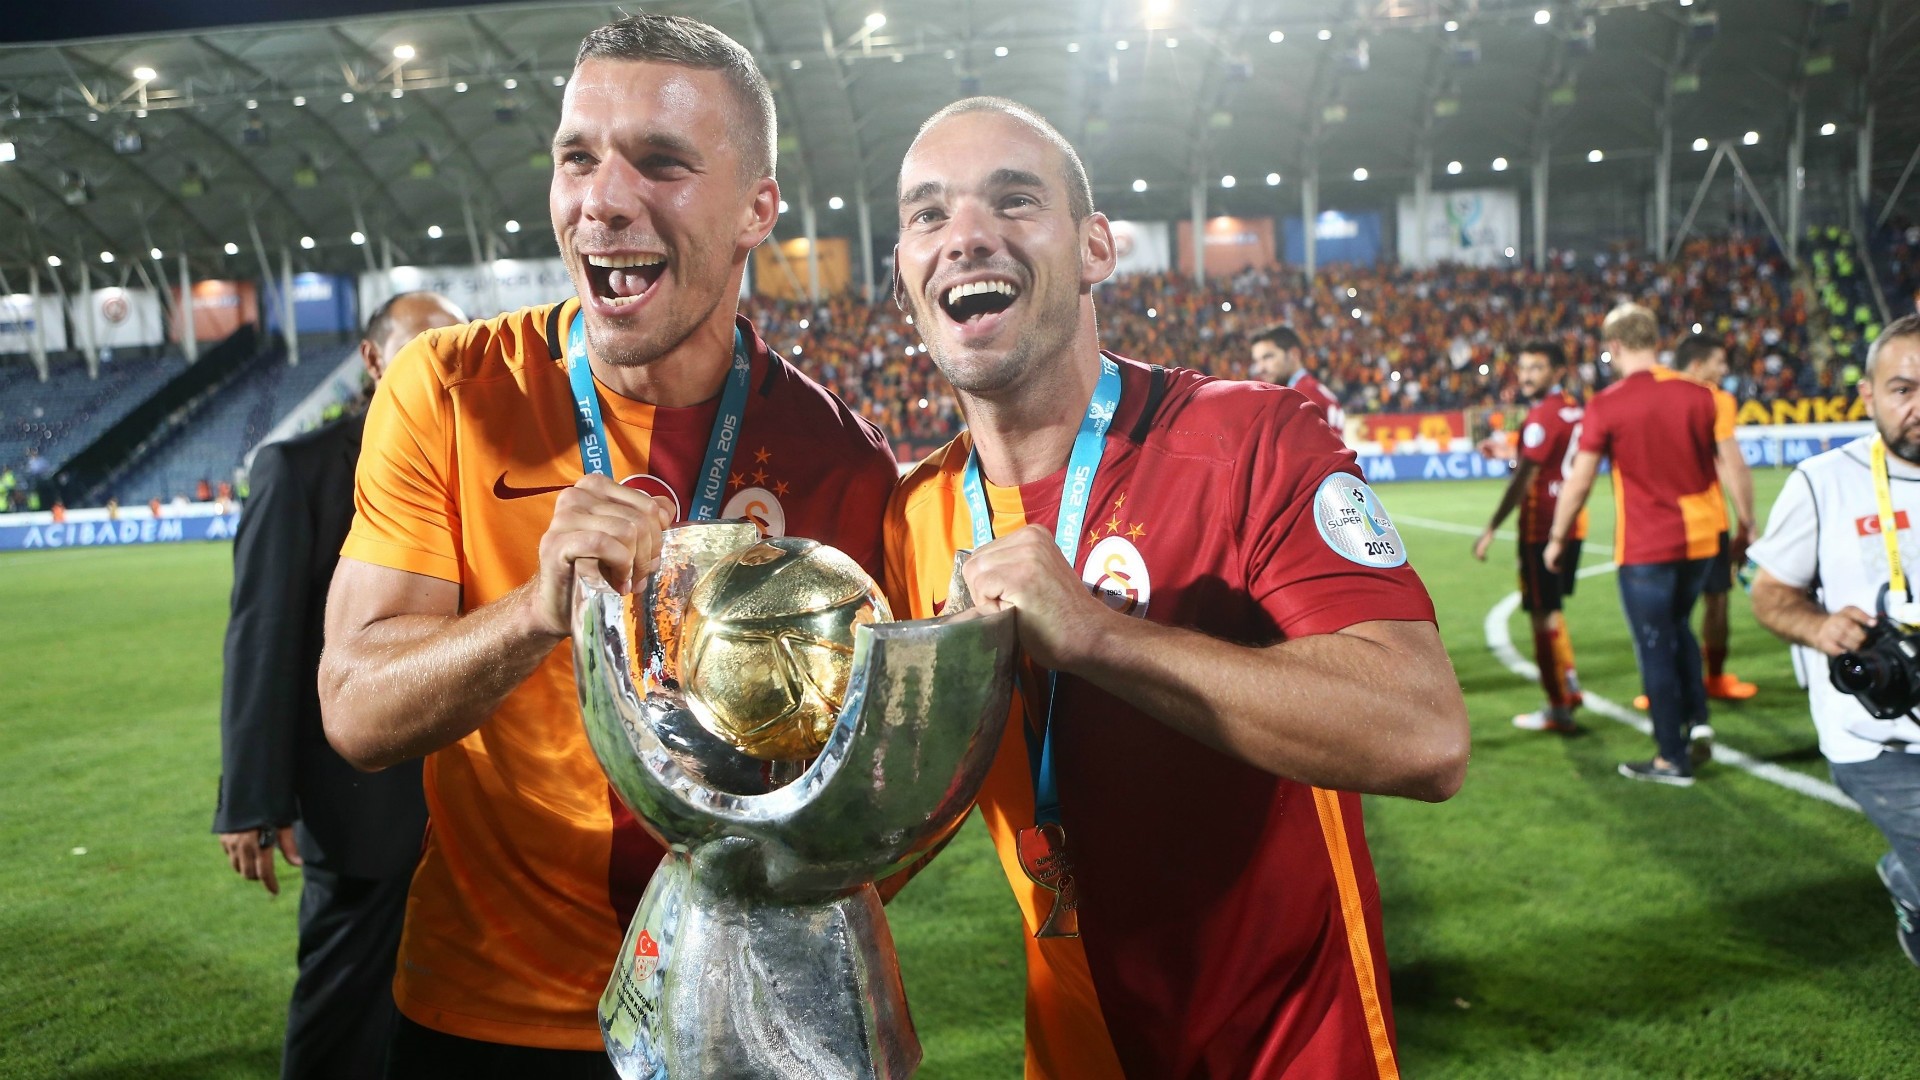 Galatasaray players Lukas Podolski (L) and Wesley Sneijder hold the trophy during a victory ceremony after Super Cup match between Galatasaray and Bursaspor in Ankara in 2015.